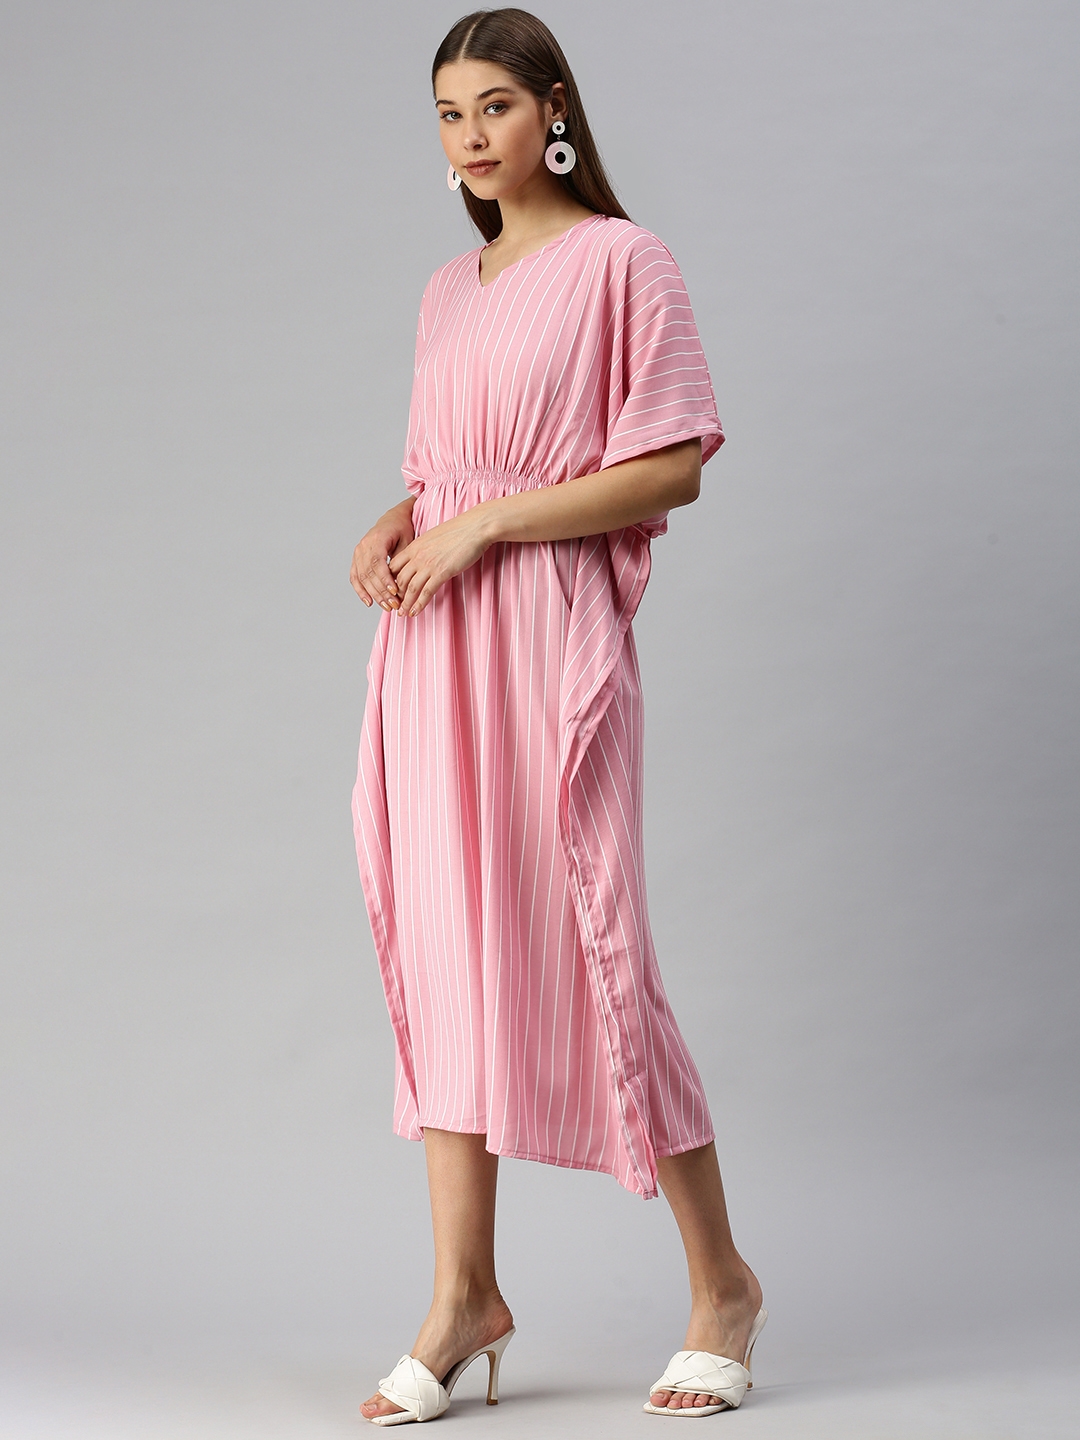 Women's Pink Polyester Striped Dresses